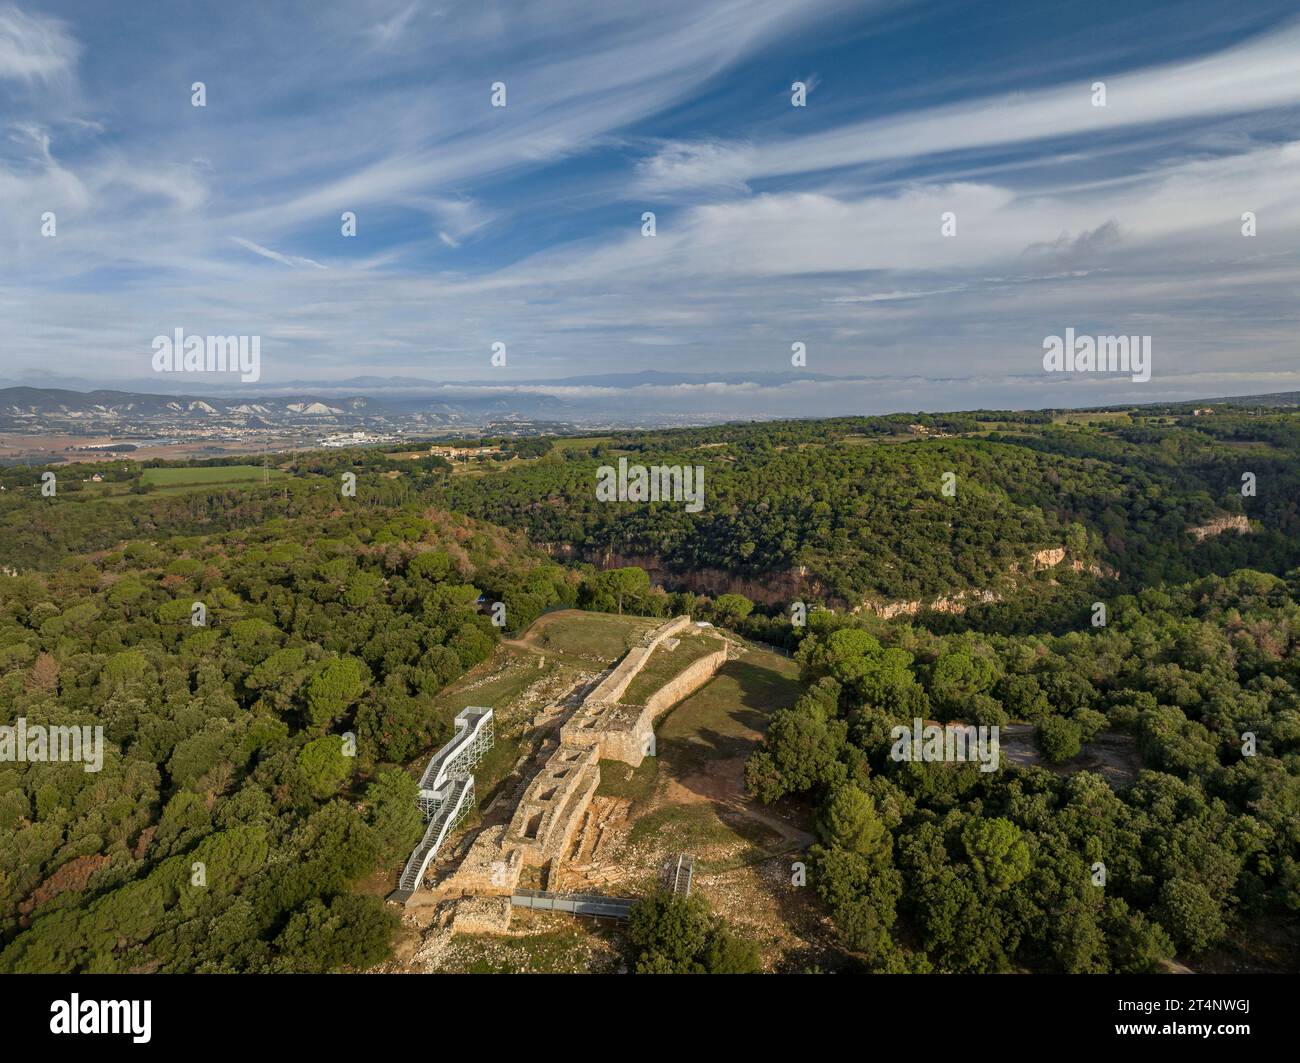 Aerial view of the Iberian settlement of Montgròs, on a hill in the Montseny natural park (Osona, Barcelona, Catalonia, Spain) Stock Photo